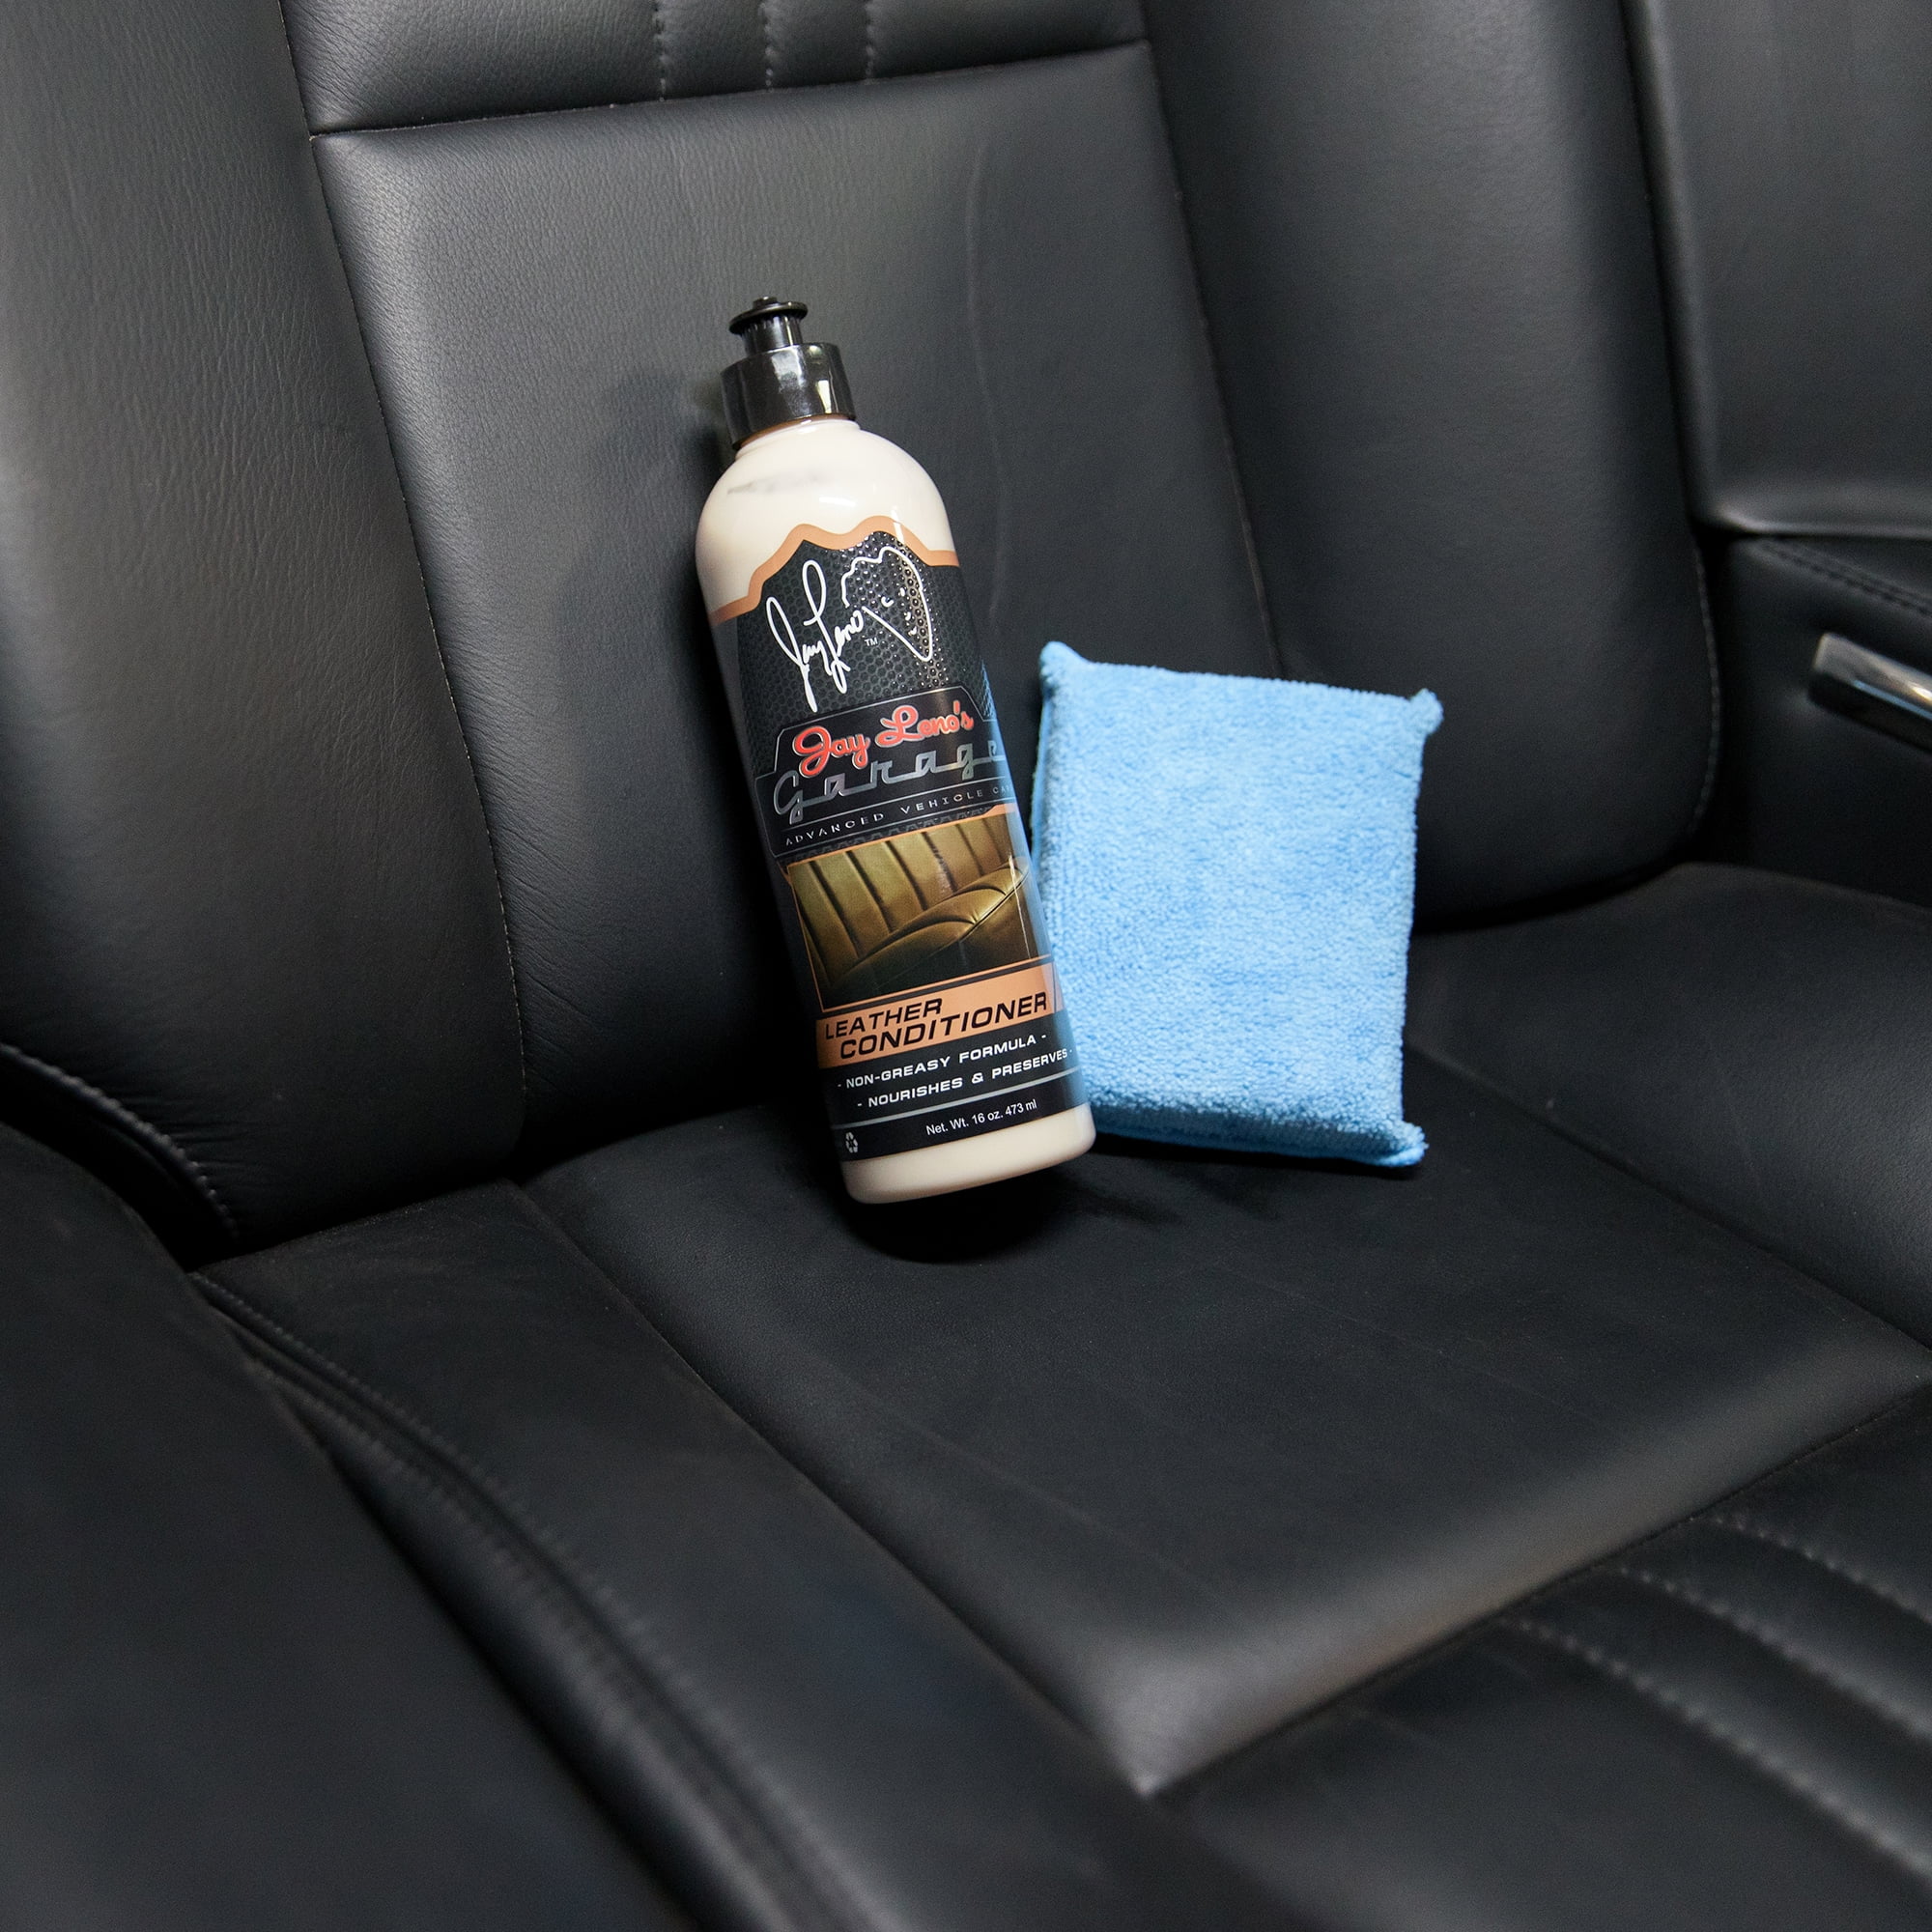 Jay Leno's Garage Leather Conditioner Wipes (30 Count) - Protect & Restore  Car Leather Surfaces 